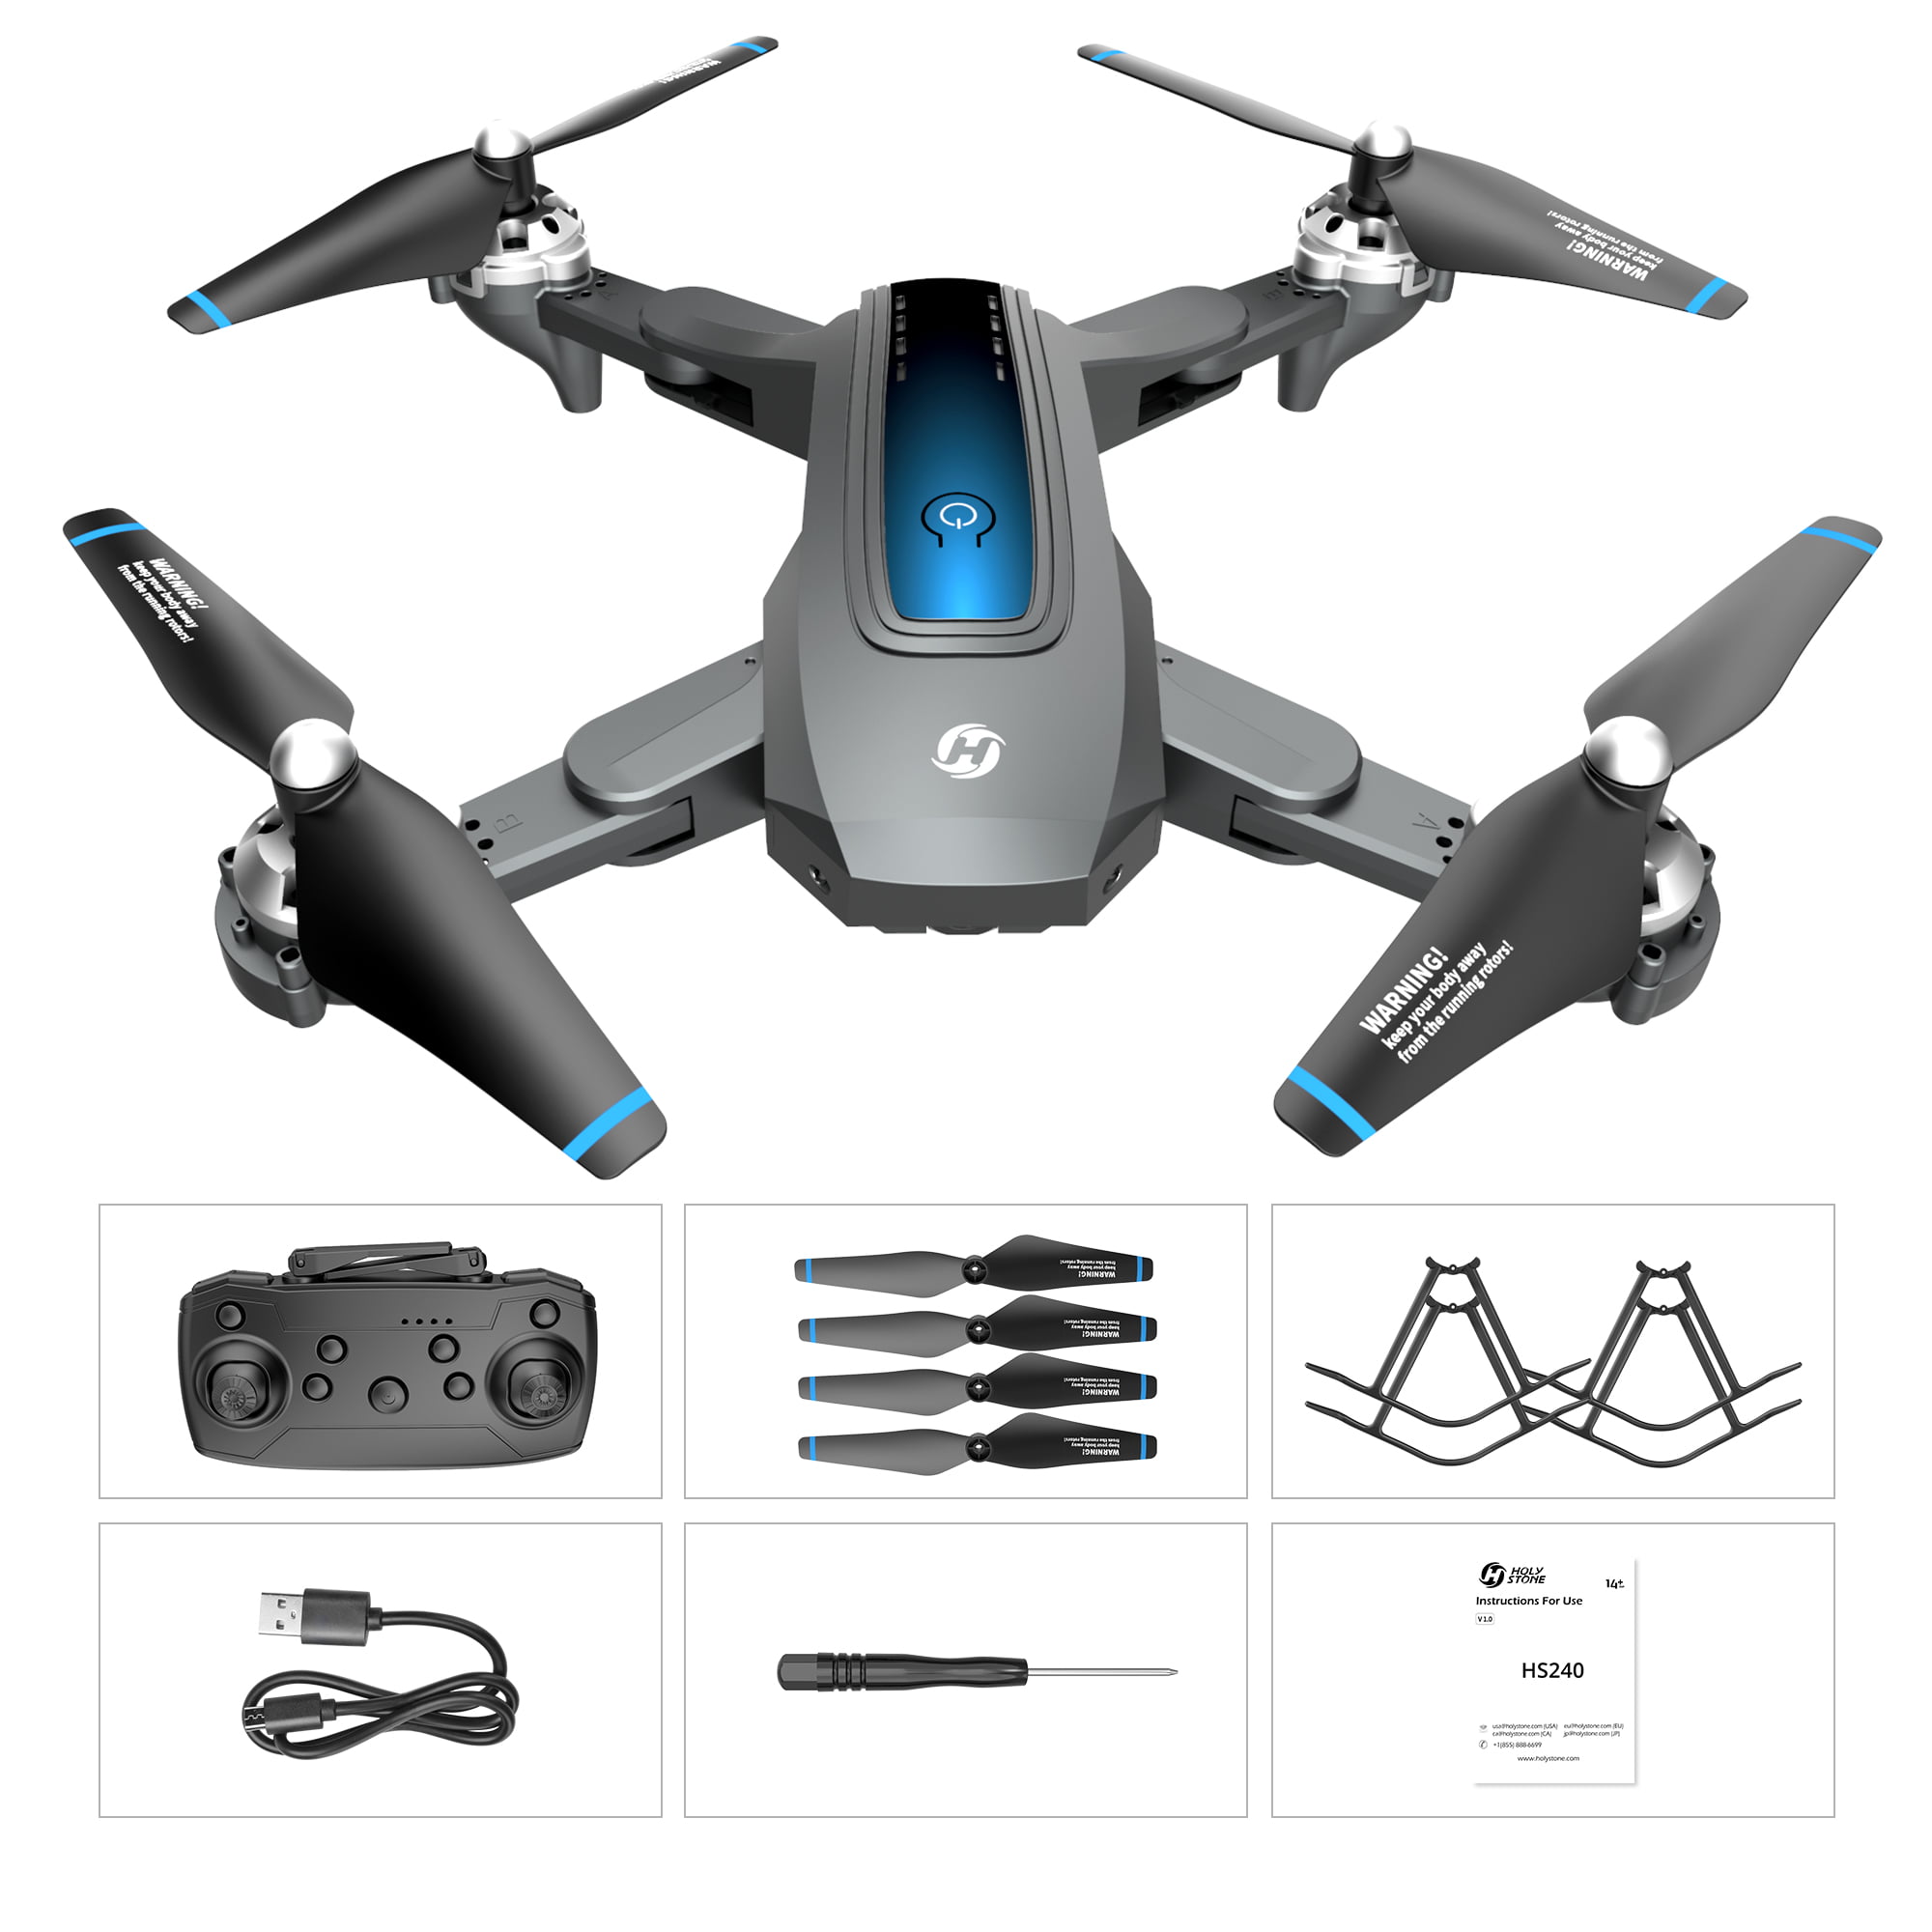 Details about   Holy Stone HS240/D10 Foldable FPV Drone with Camera 720P Quadcopter 2 Batteries